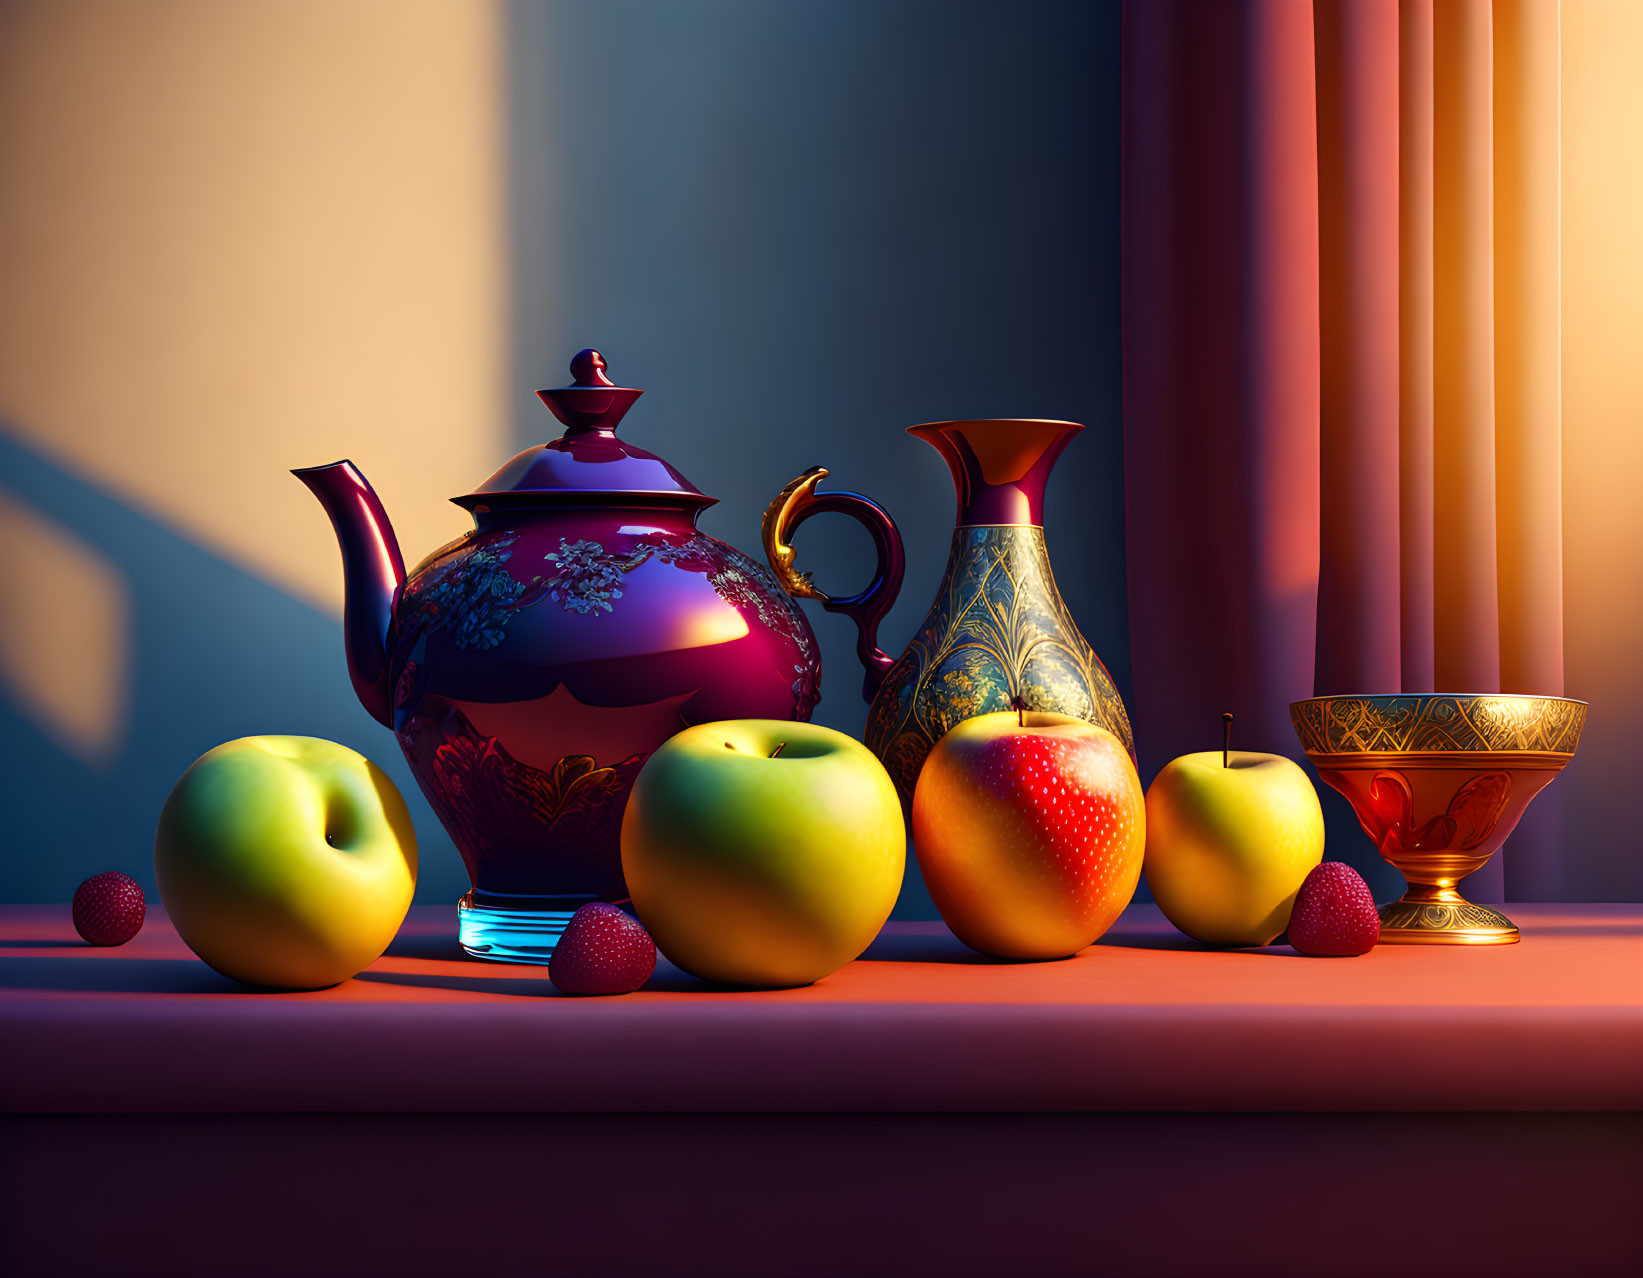 Ornate teapot, decorated vase, fruits, and bowl in warm sunlight.